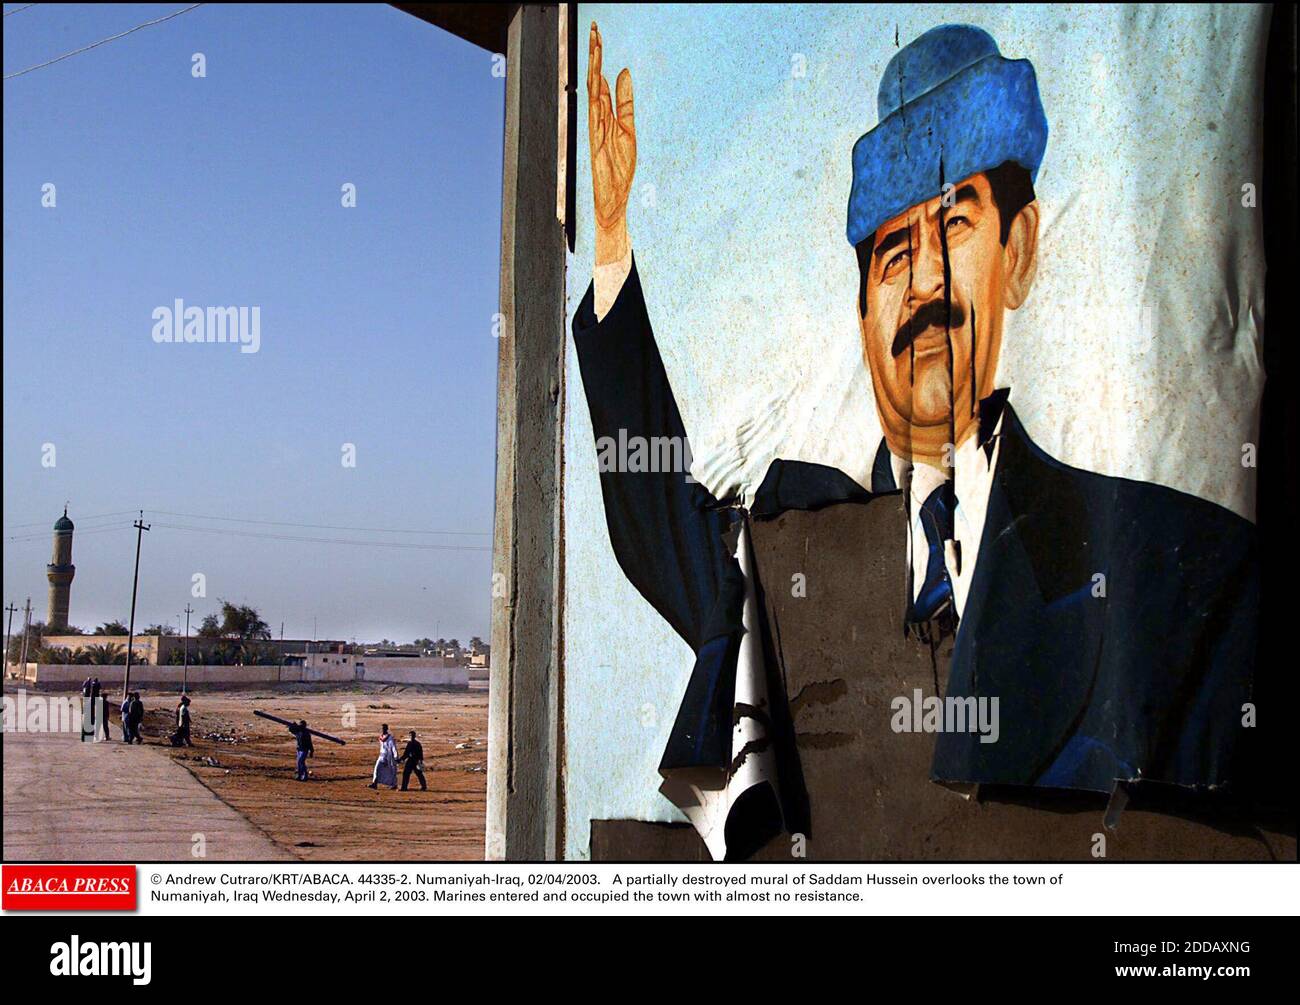 NO FILM, NO VIDEO, NO TV, NO DOCUMENTARY - © Andrew Cutraro/KRT/ABACA. 44335-2. Numaniyah-Iraq, 02/04/2003. A partially destroyed mural of Saddam Hussein overlooks the town of Numaniyah, Iraq Wednesday, April 2, 2003. Marines entered and occupied the town with almost no resistance. Stock Photo